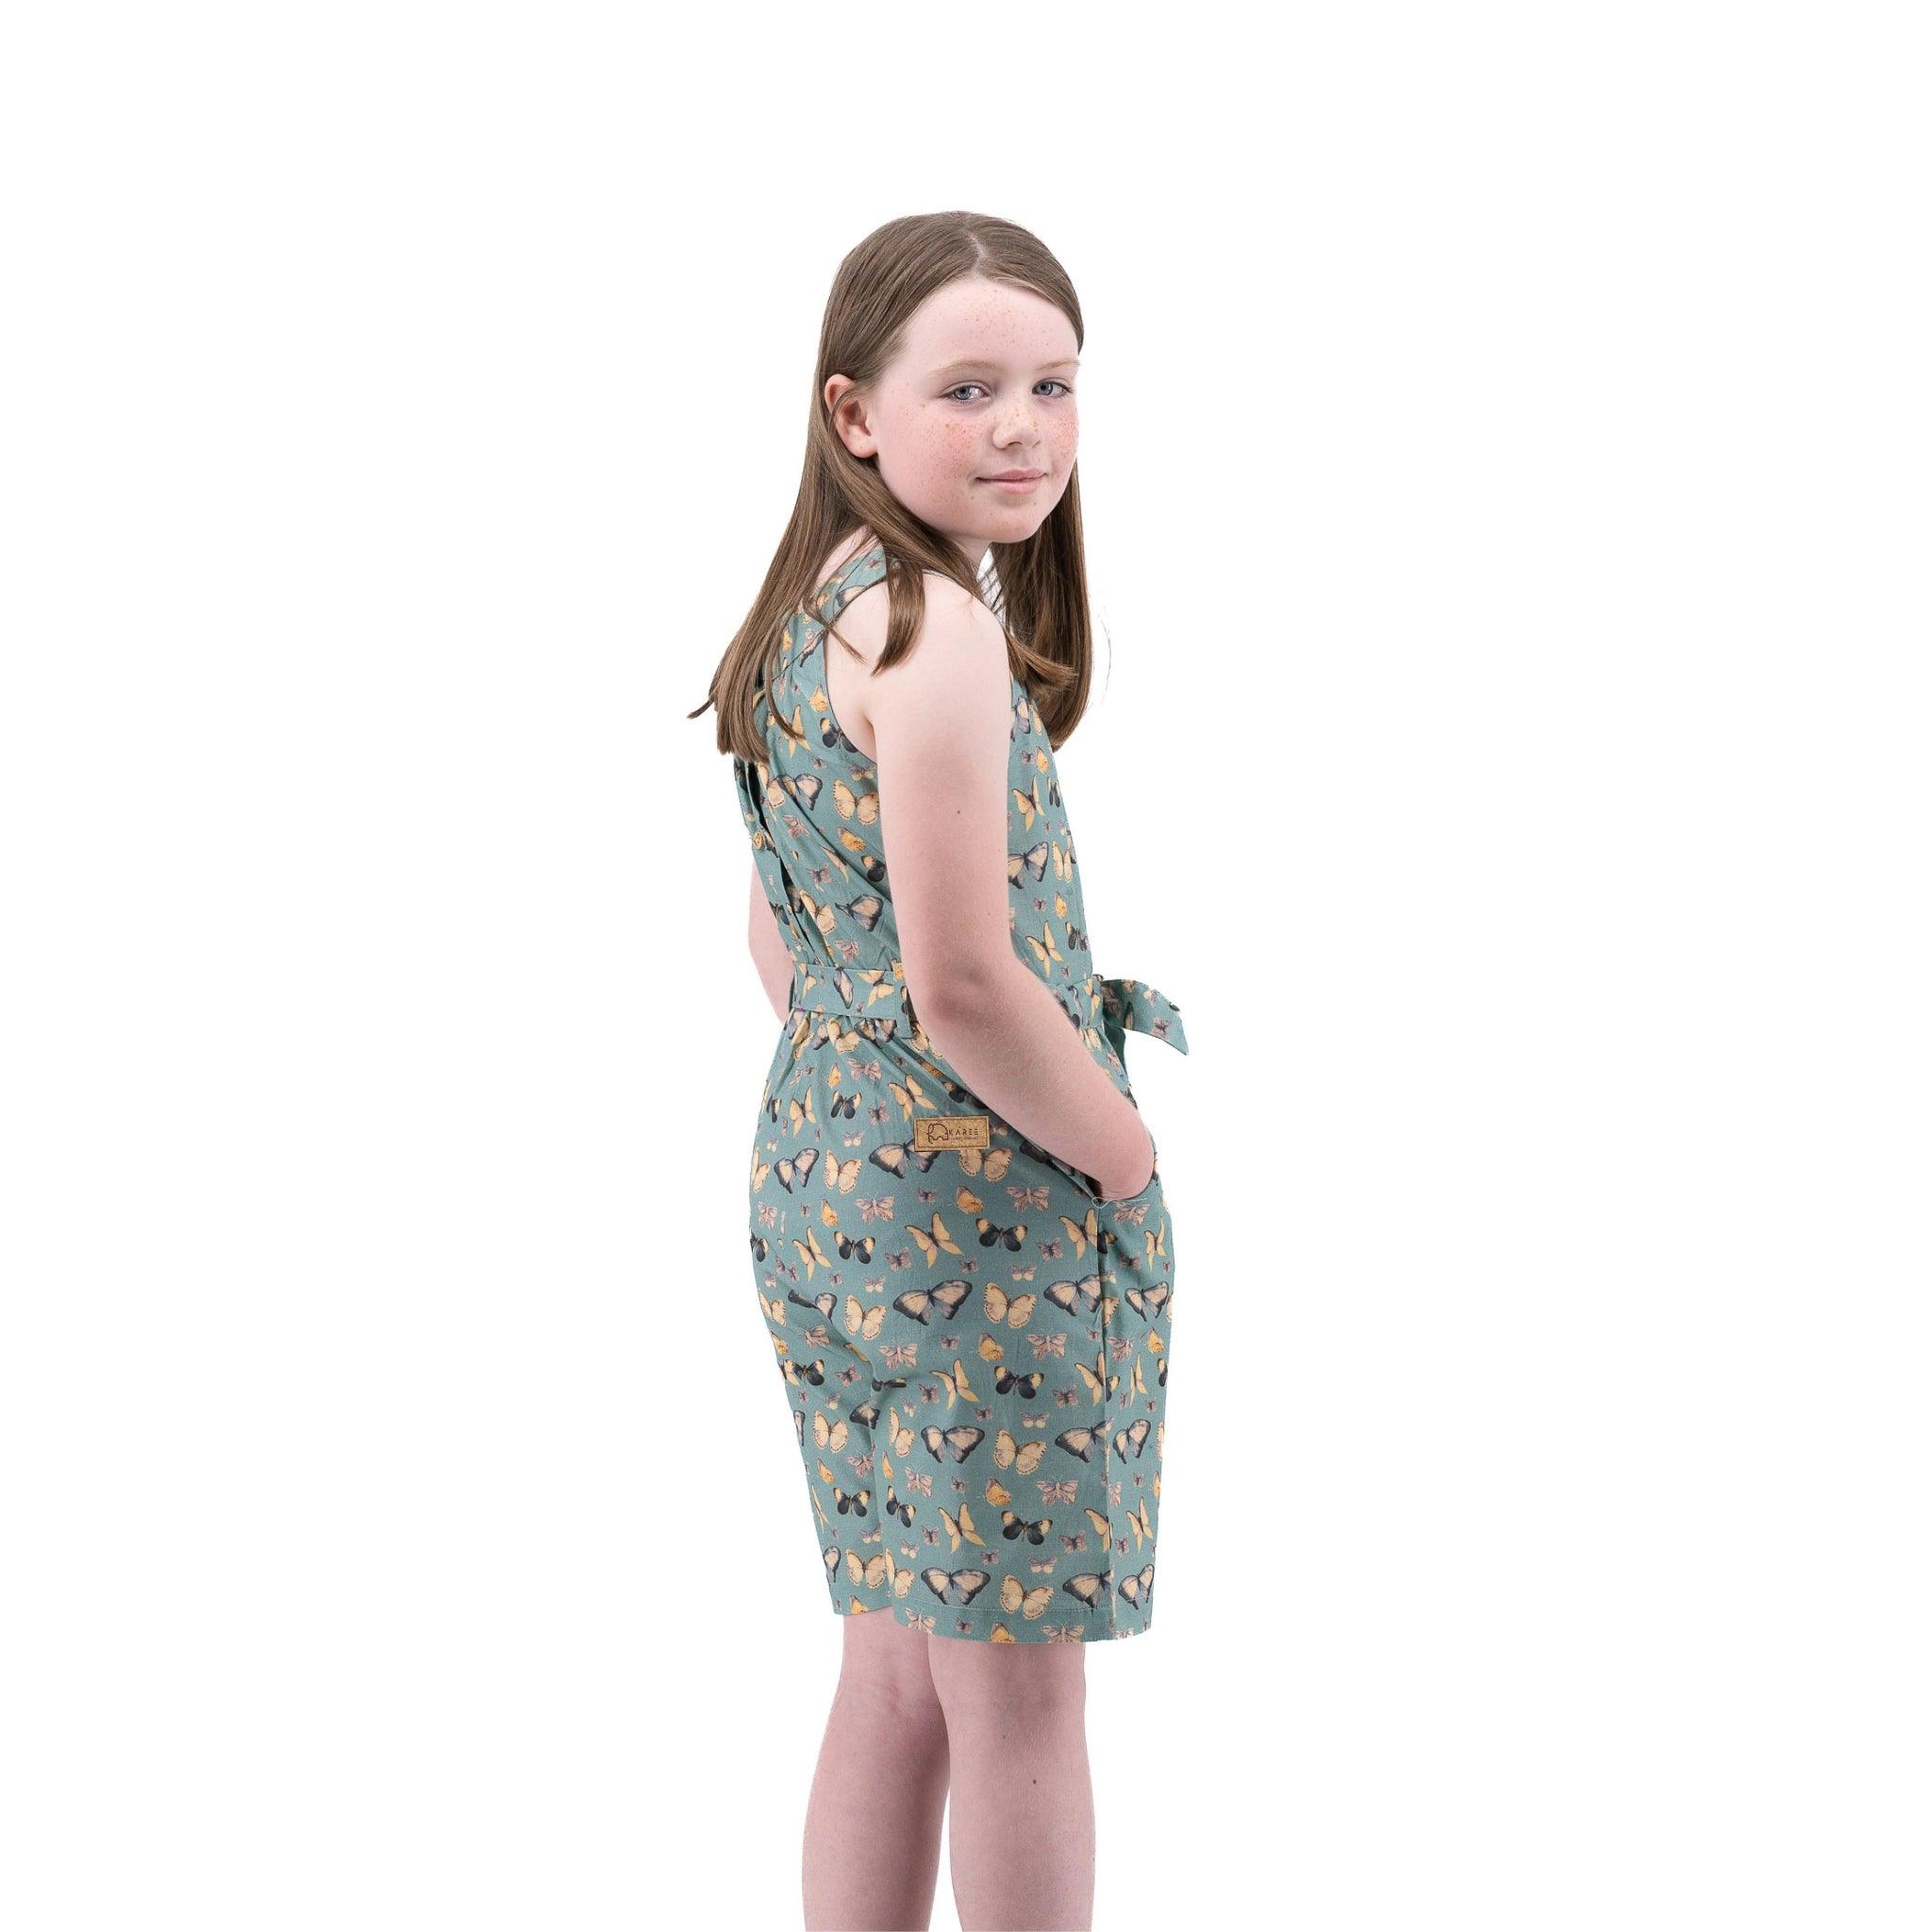 A young girl standing sideways, wearing a Karee Blue Surf Adventure-ready Cotton Play Suit with butterfly patterns, against a white background.